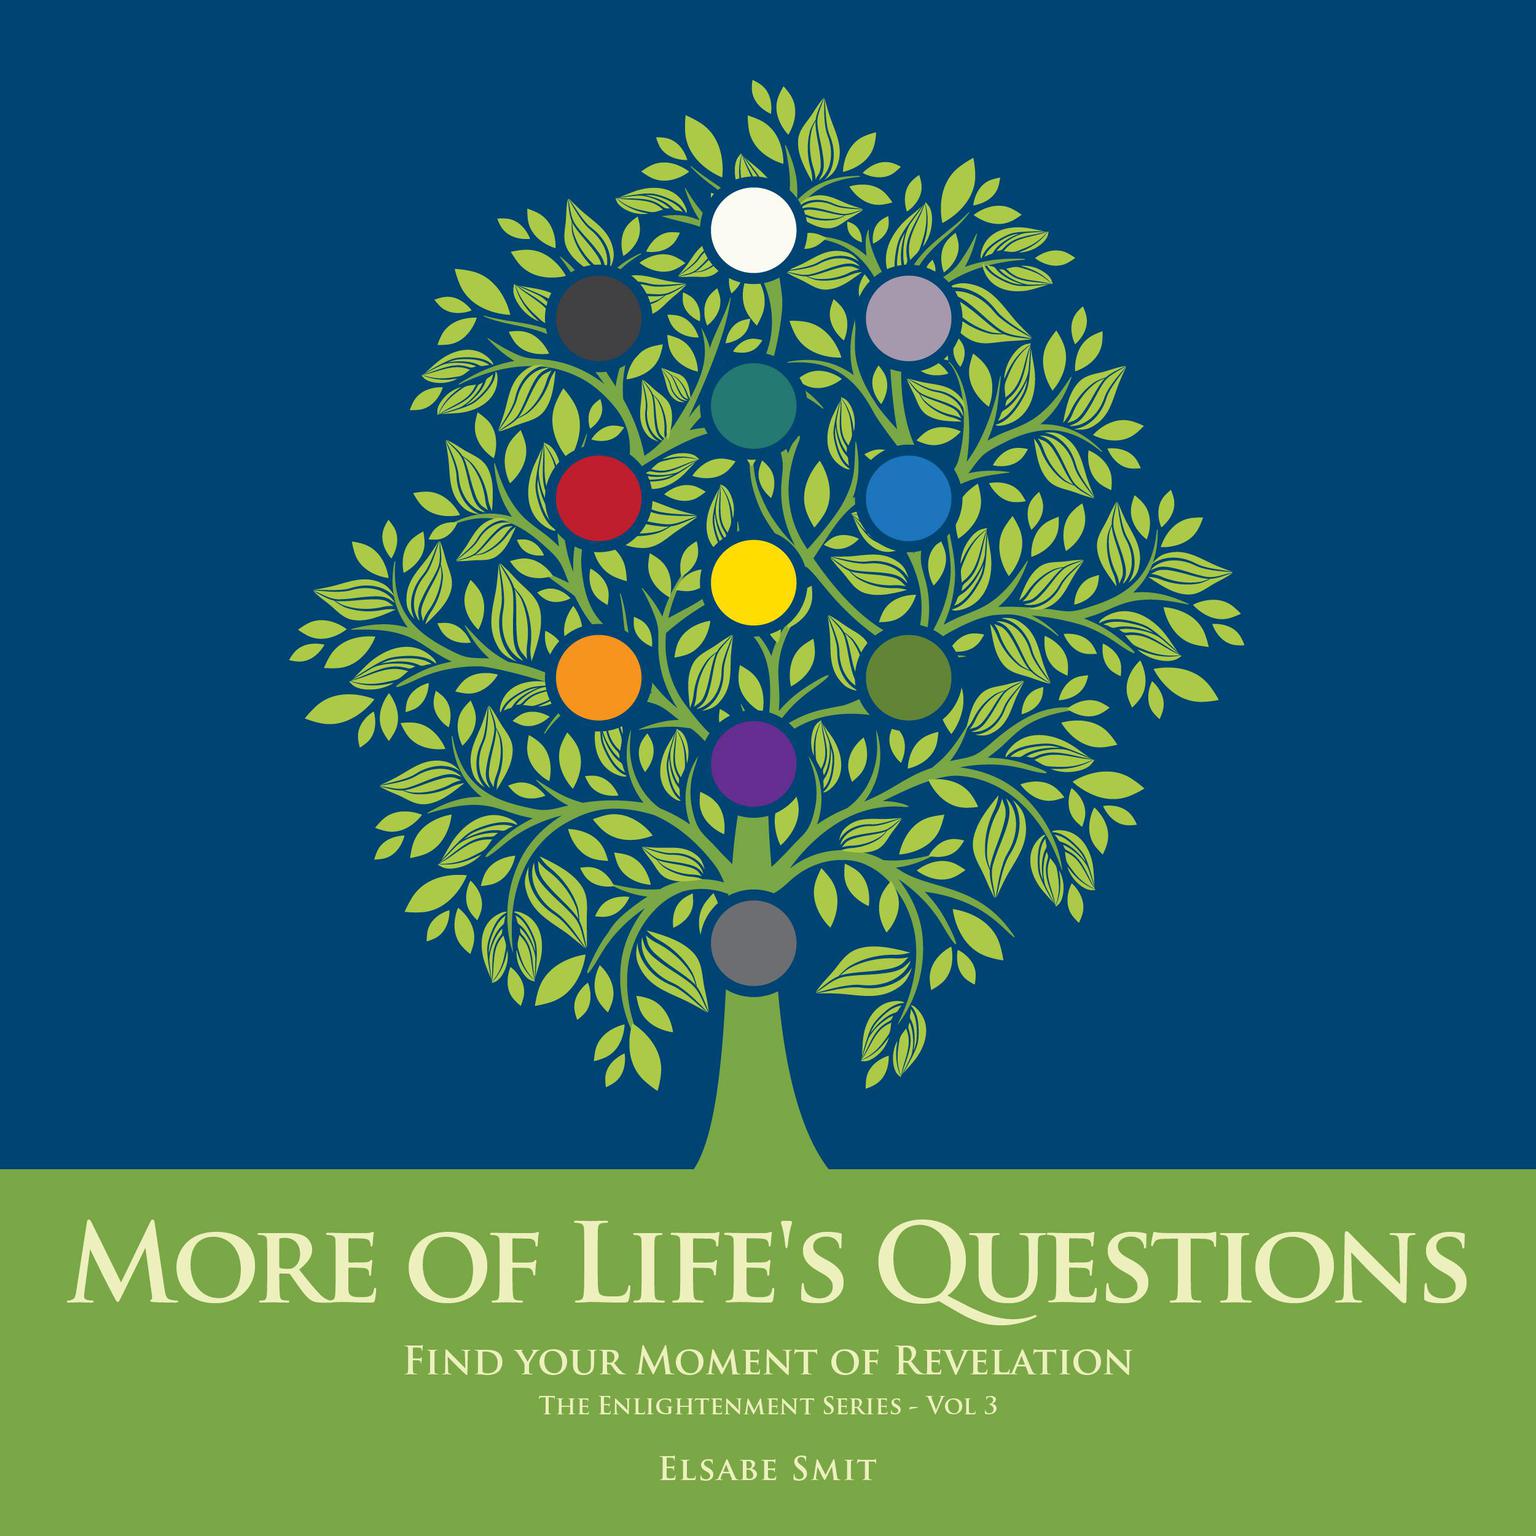 More of Lifes Questions: Find Your Moment of Revelation (The Enlightenment Series Vol 3) Audiobook, by Elsabe Smit